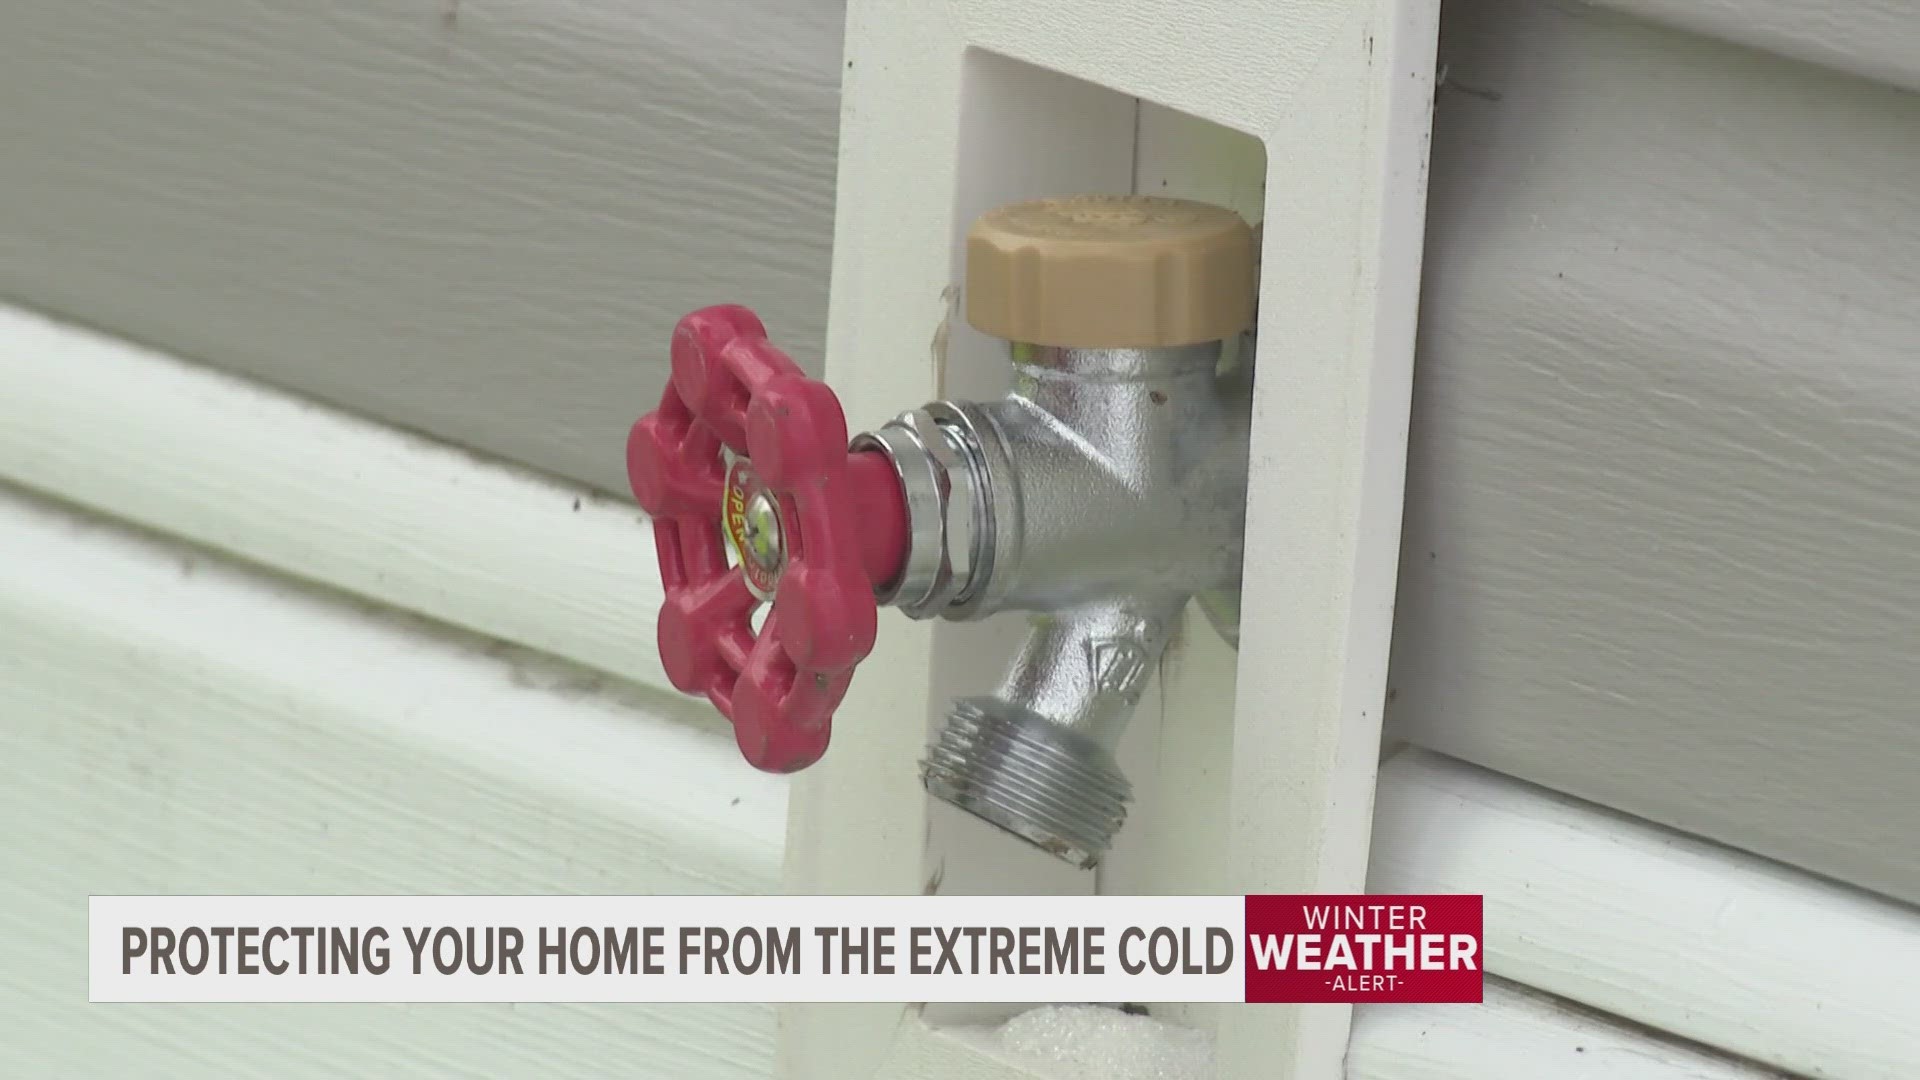 How to Protect Your Sprinkler System During a Freeze Warning